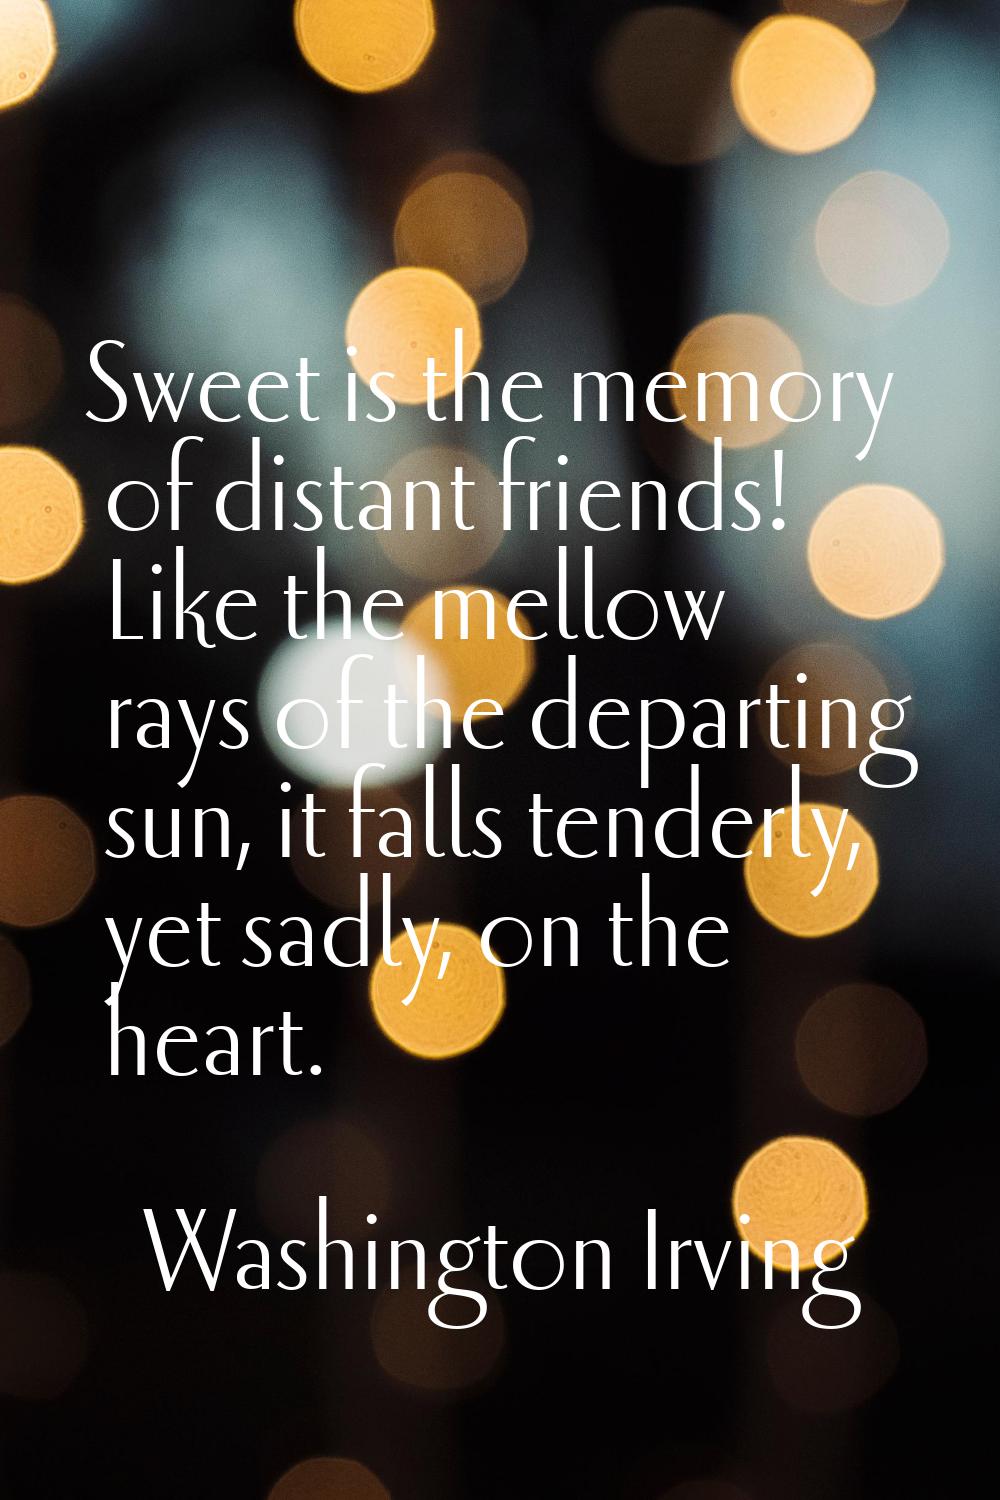 Sweet is the memory of distant friends! Like the mellow rays of the departing sun, it falls tenderl